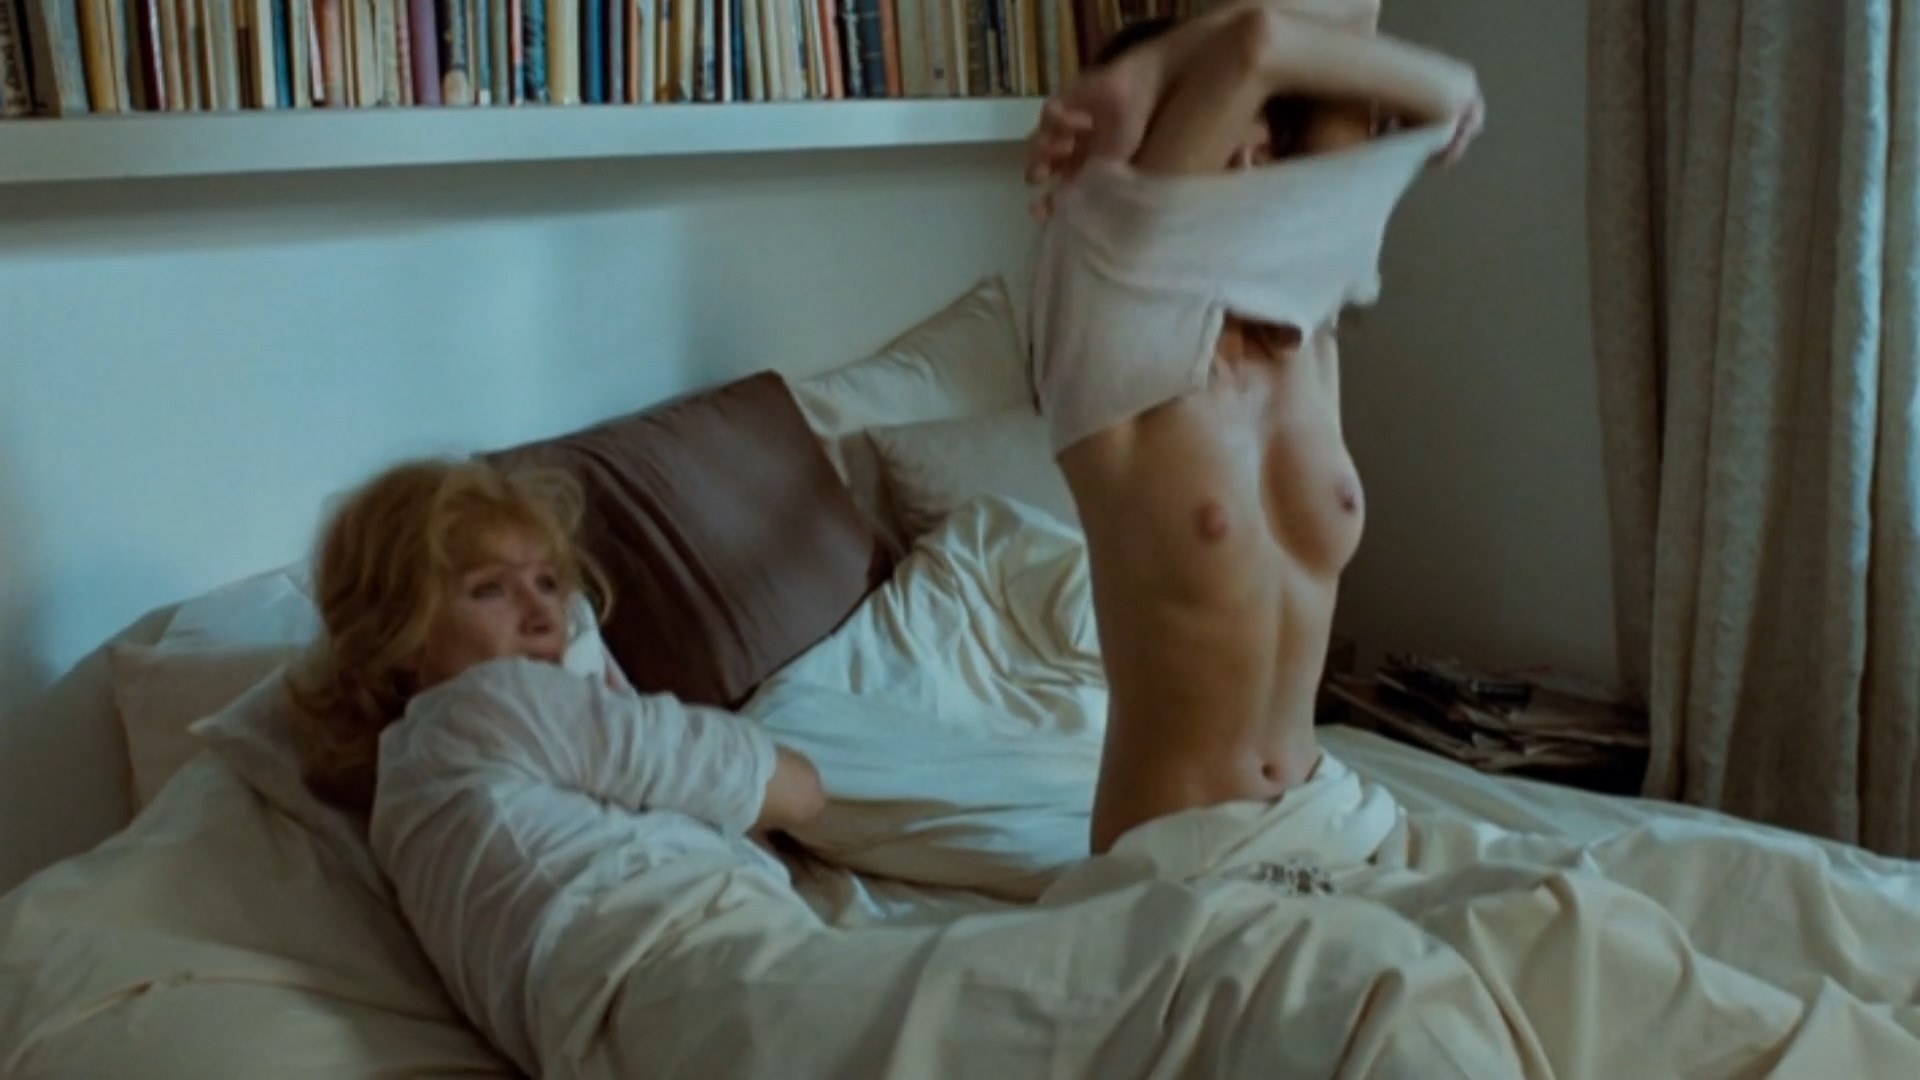 Bibi andersson naked